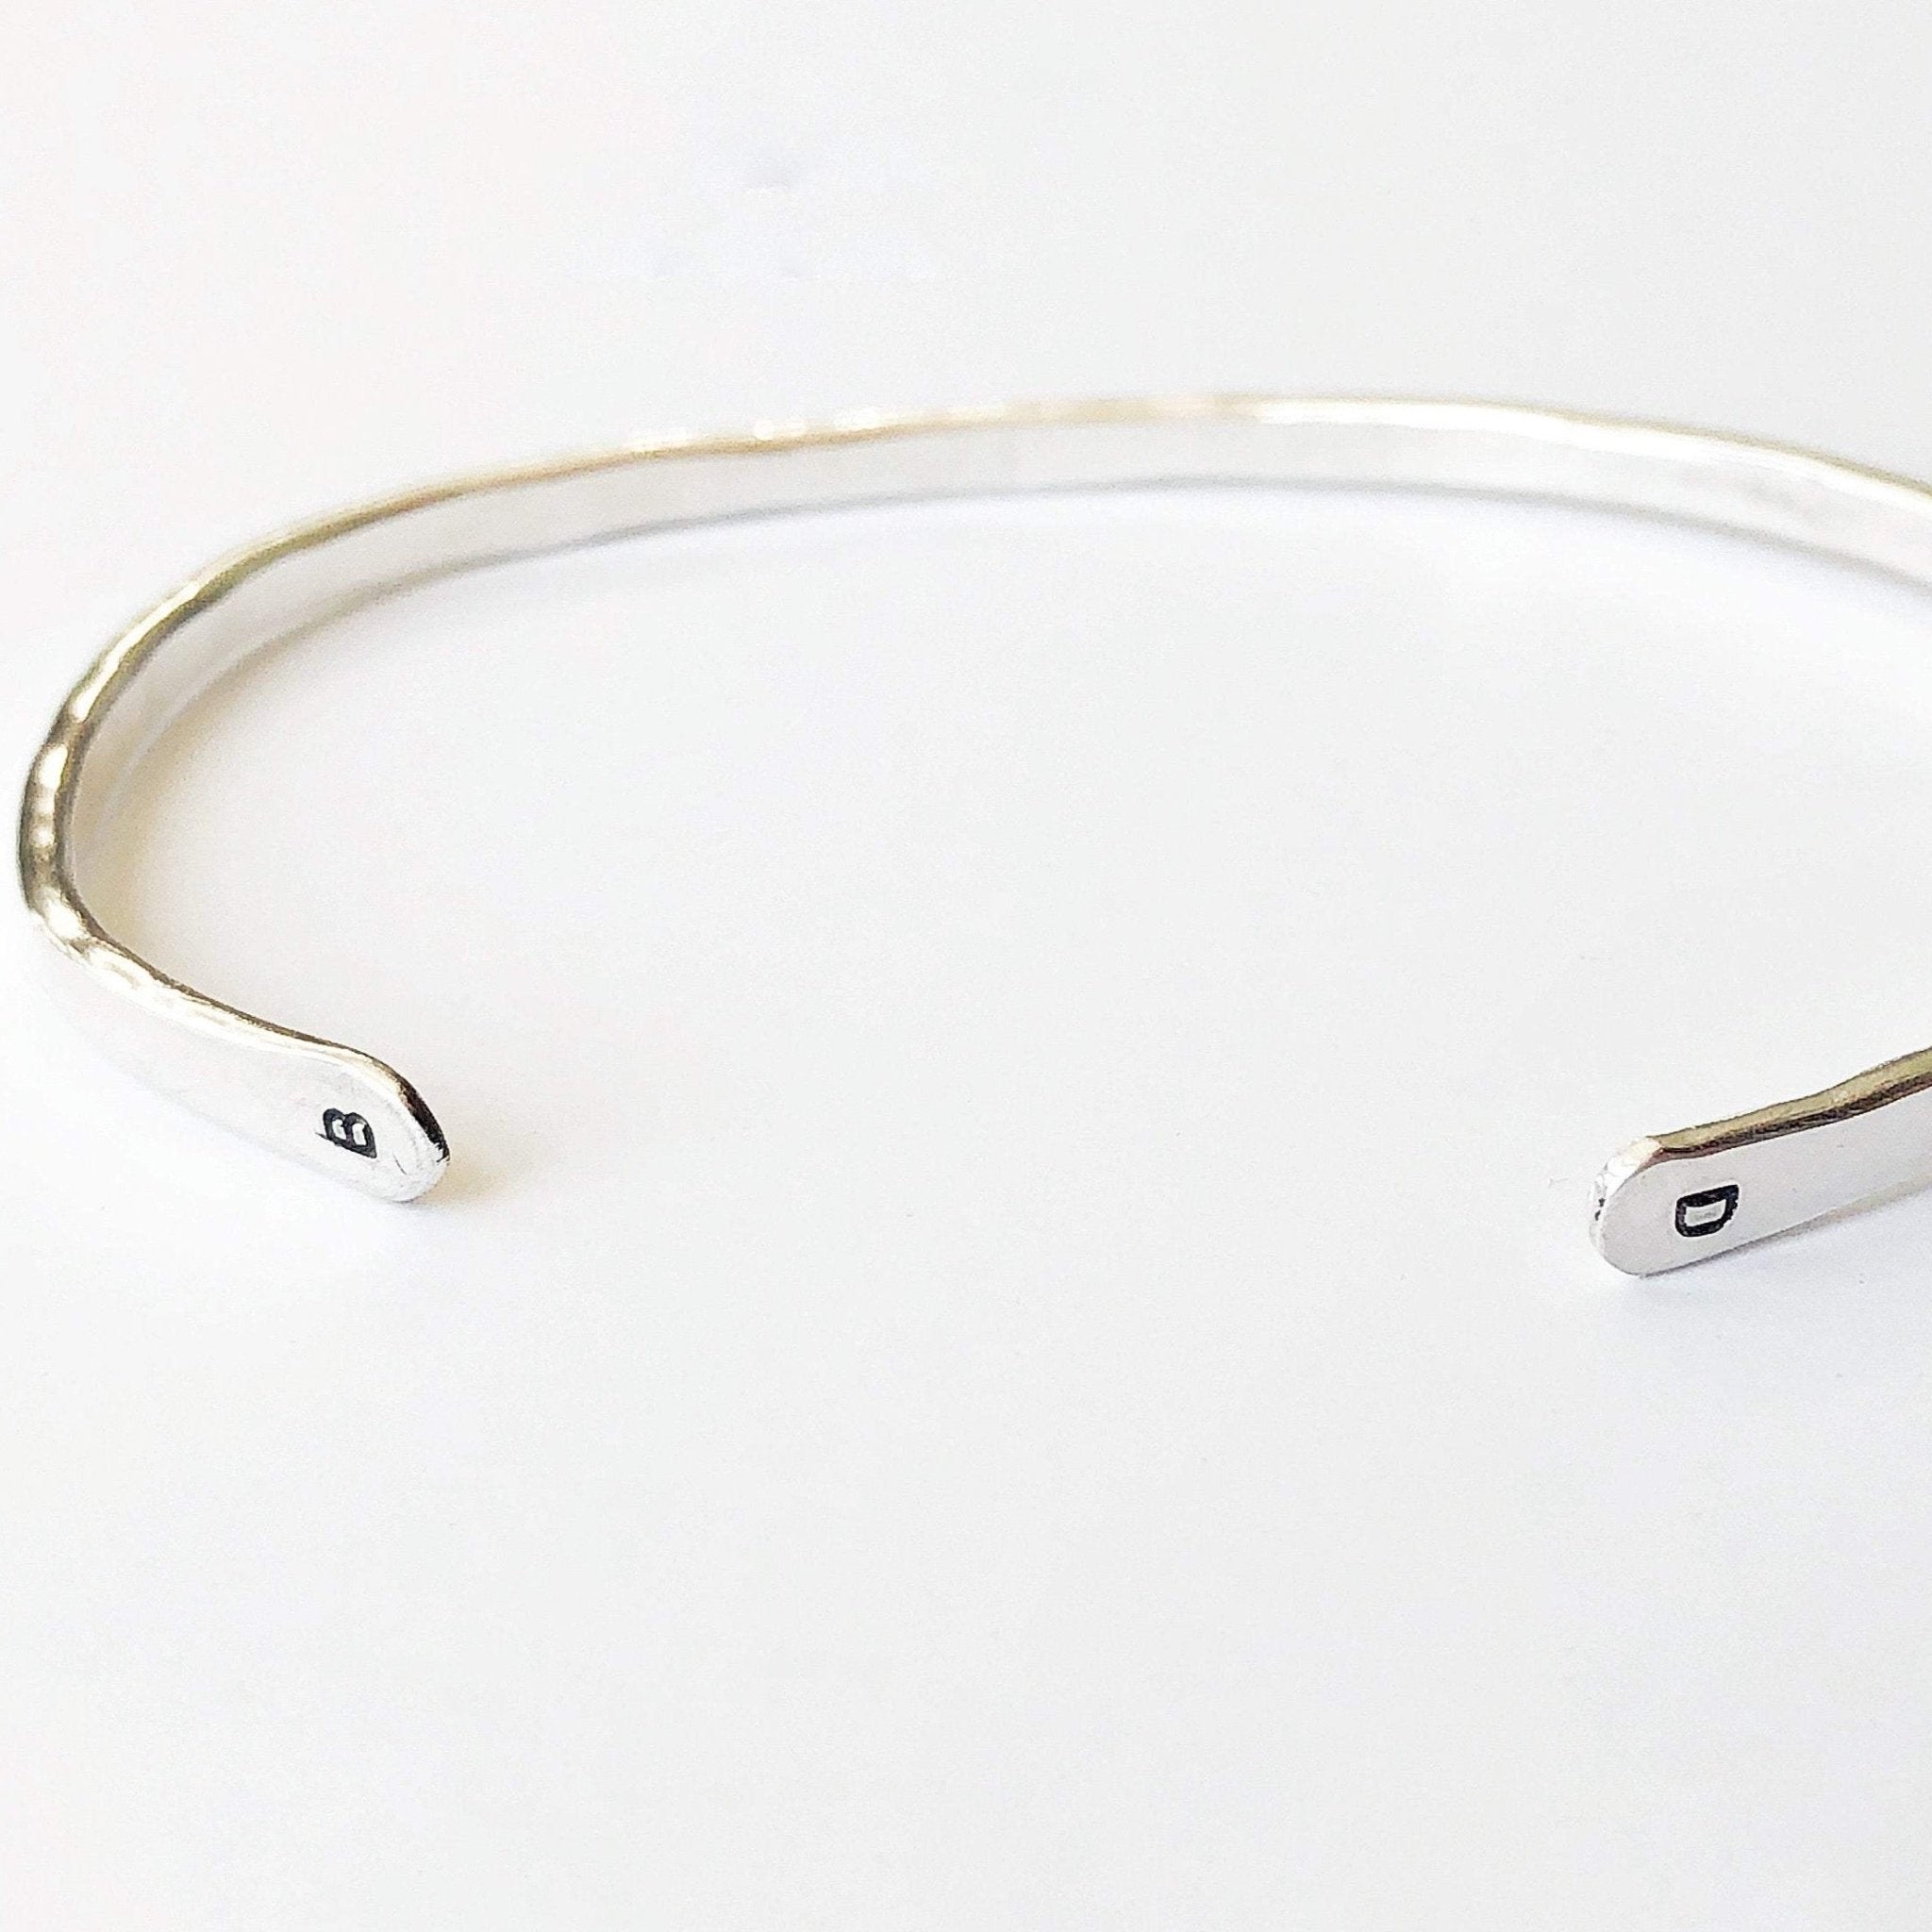 Silver textured bangle bracelet with initials stamped on both ends. Charlie Bangle by Sarah Cornwell Jewelry